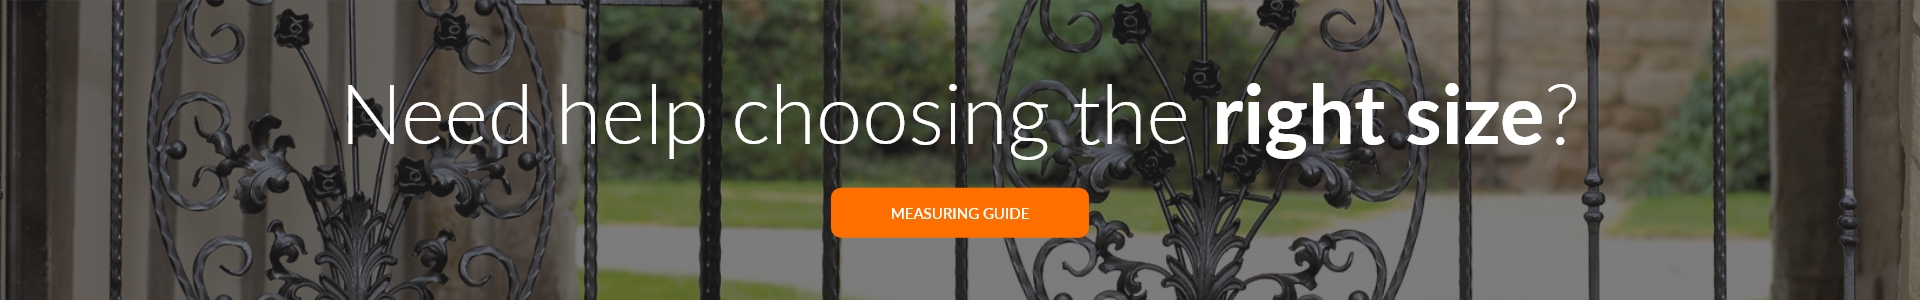 Read the measuring guide for help with ordering sizes